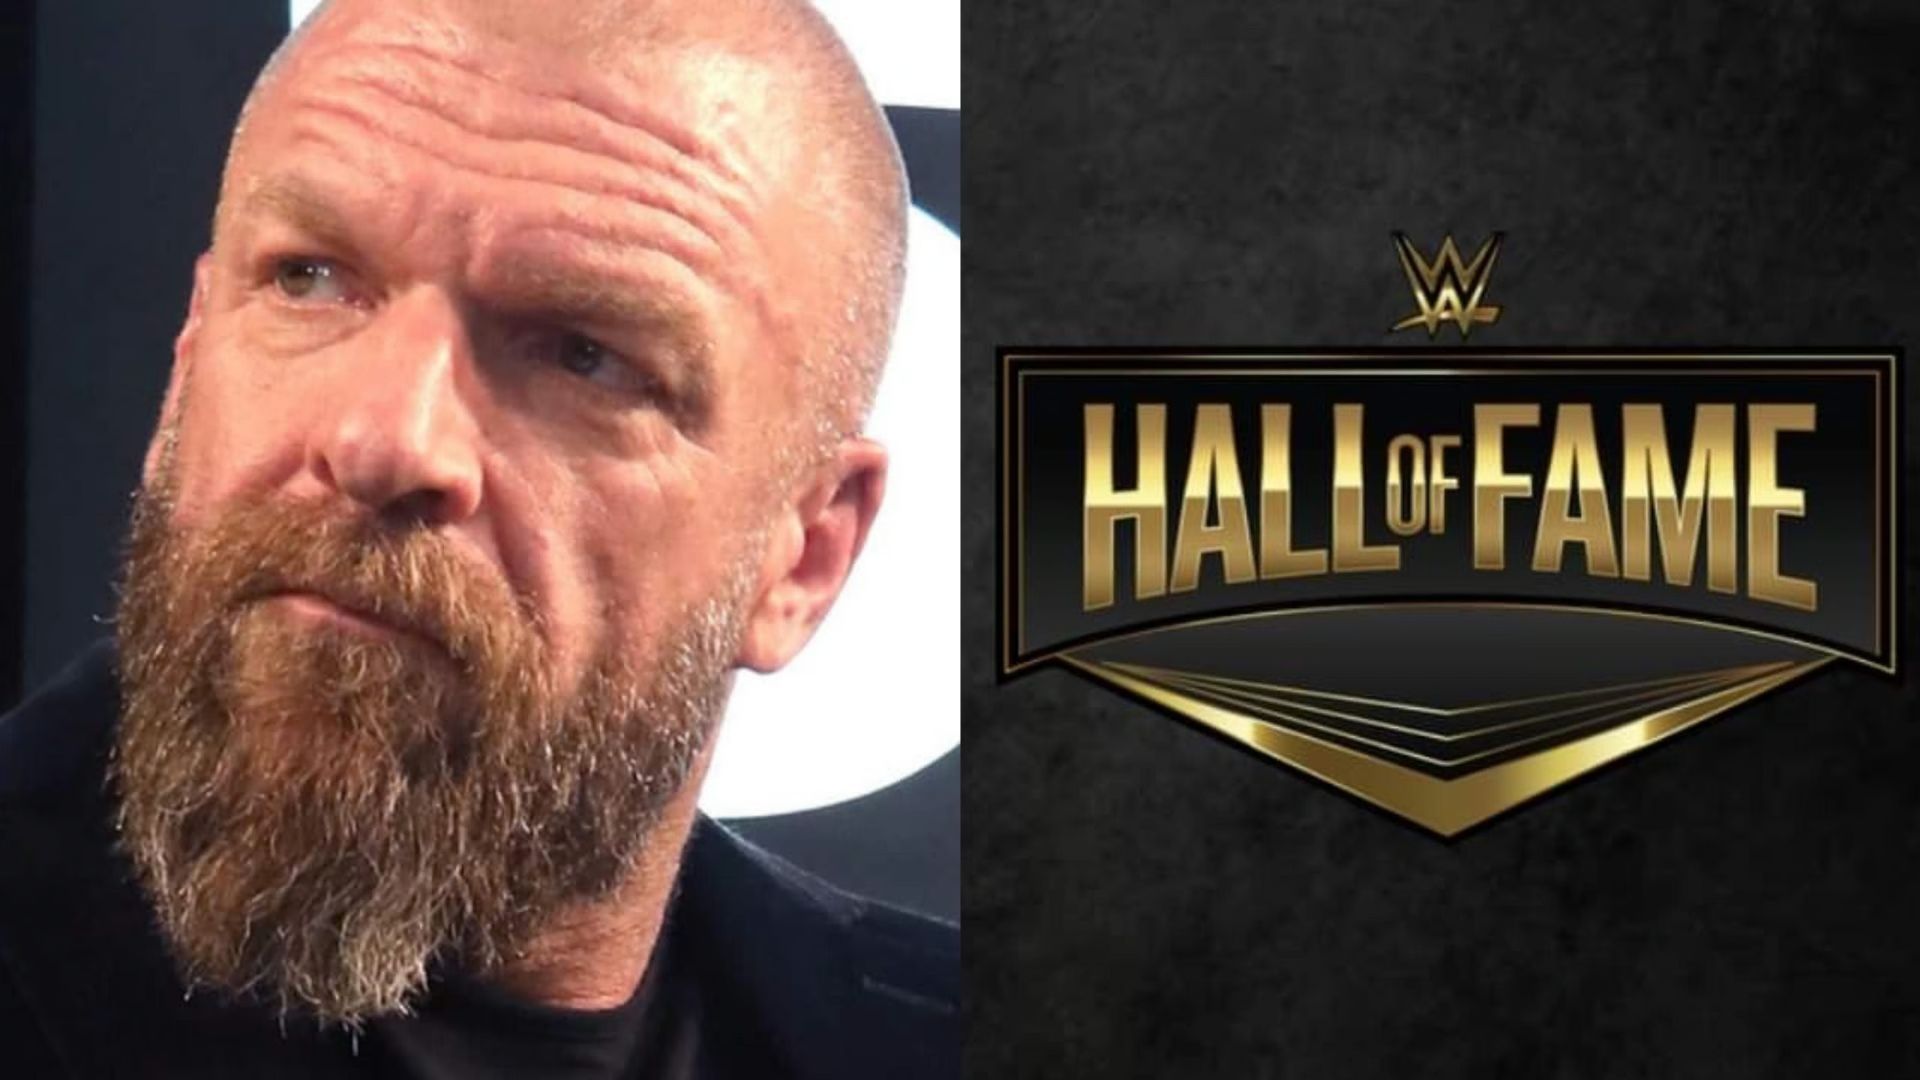 Triple H has brought many old and new faces to WWE